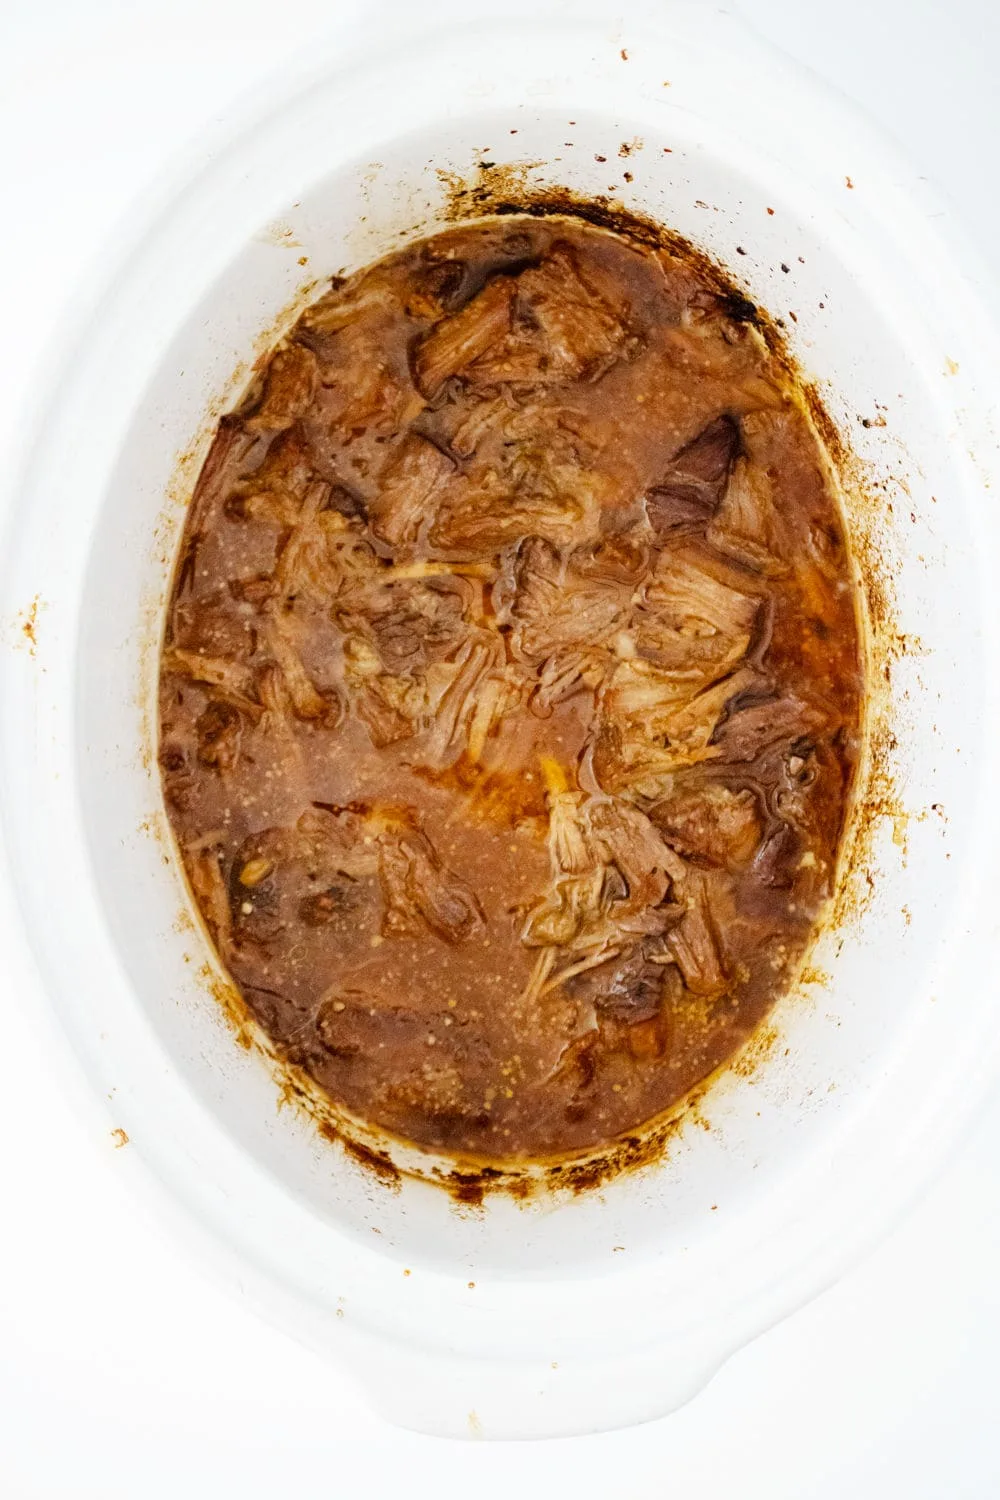 Shredded beef in crockpot ready to serve